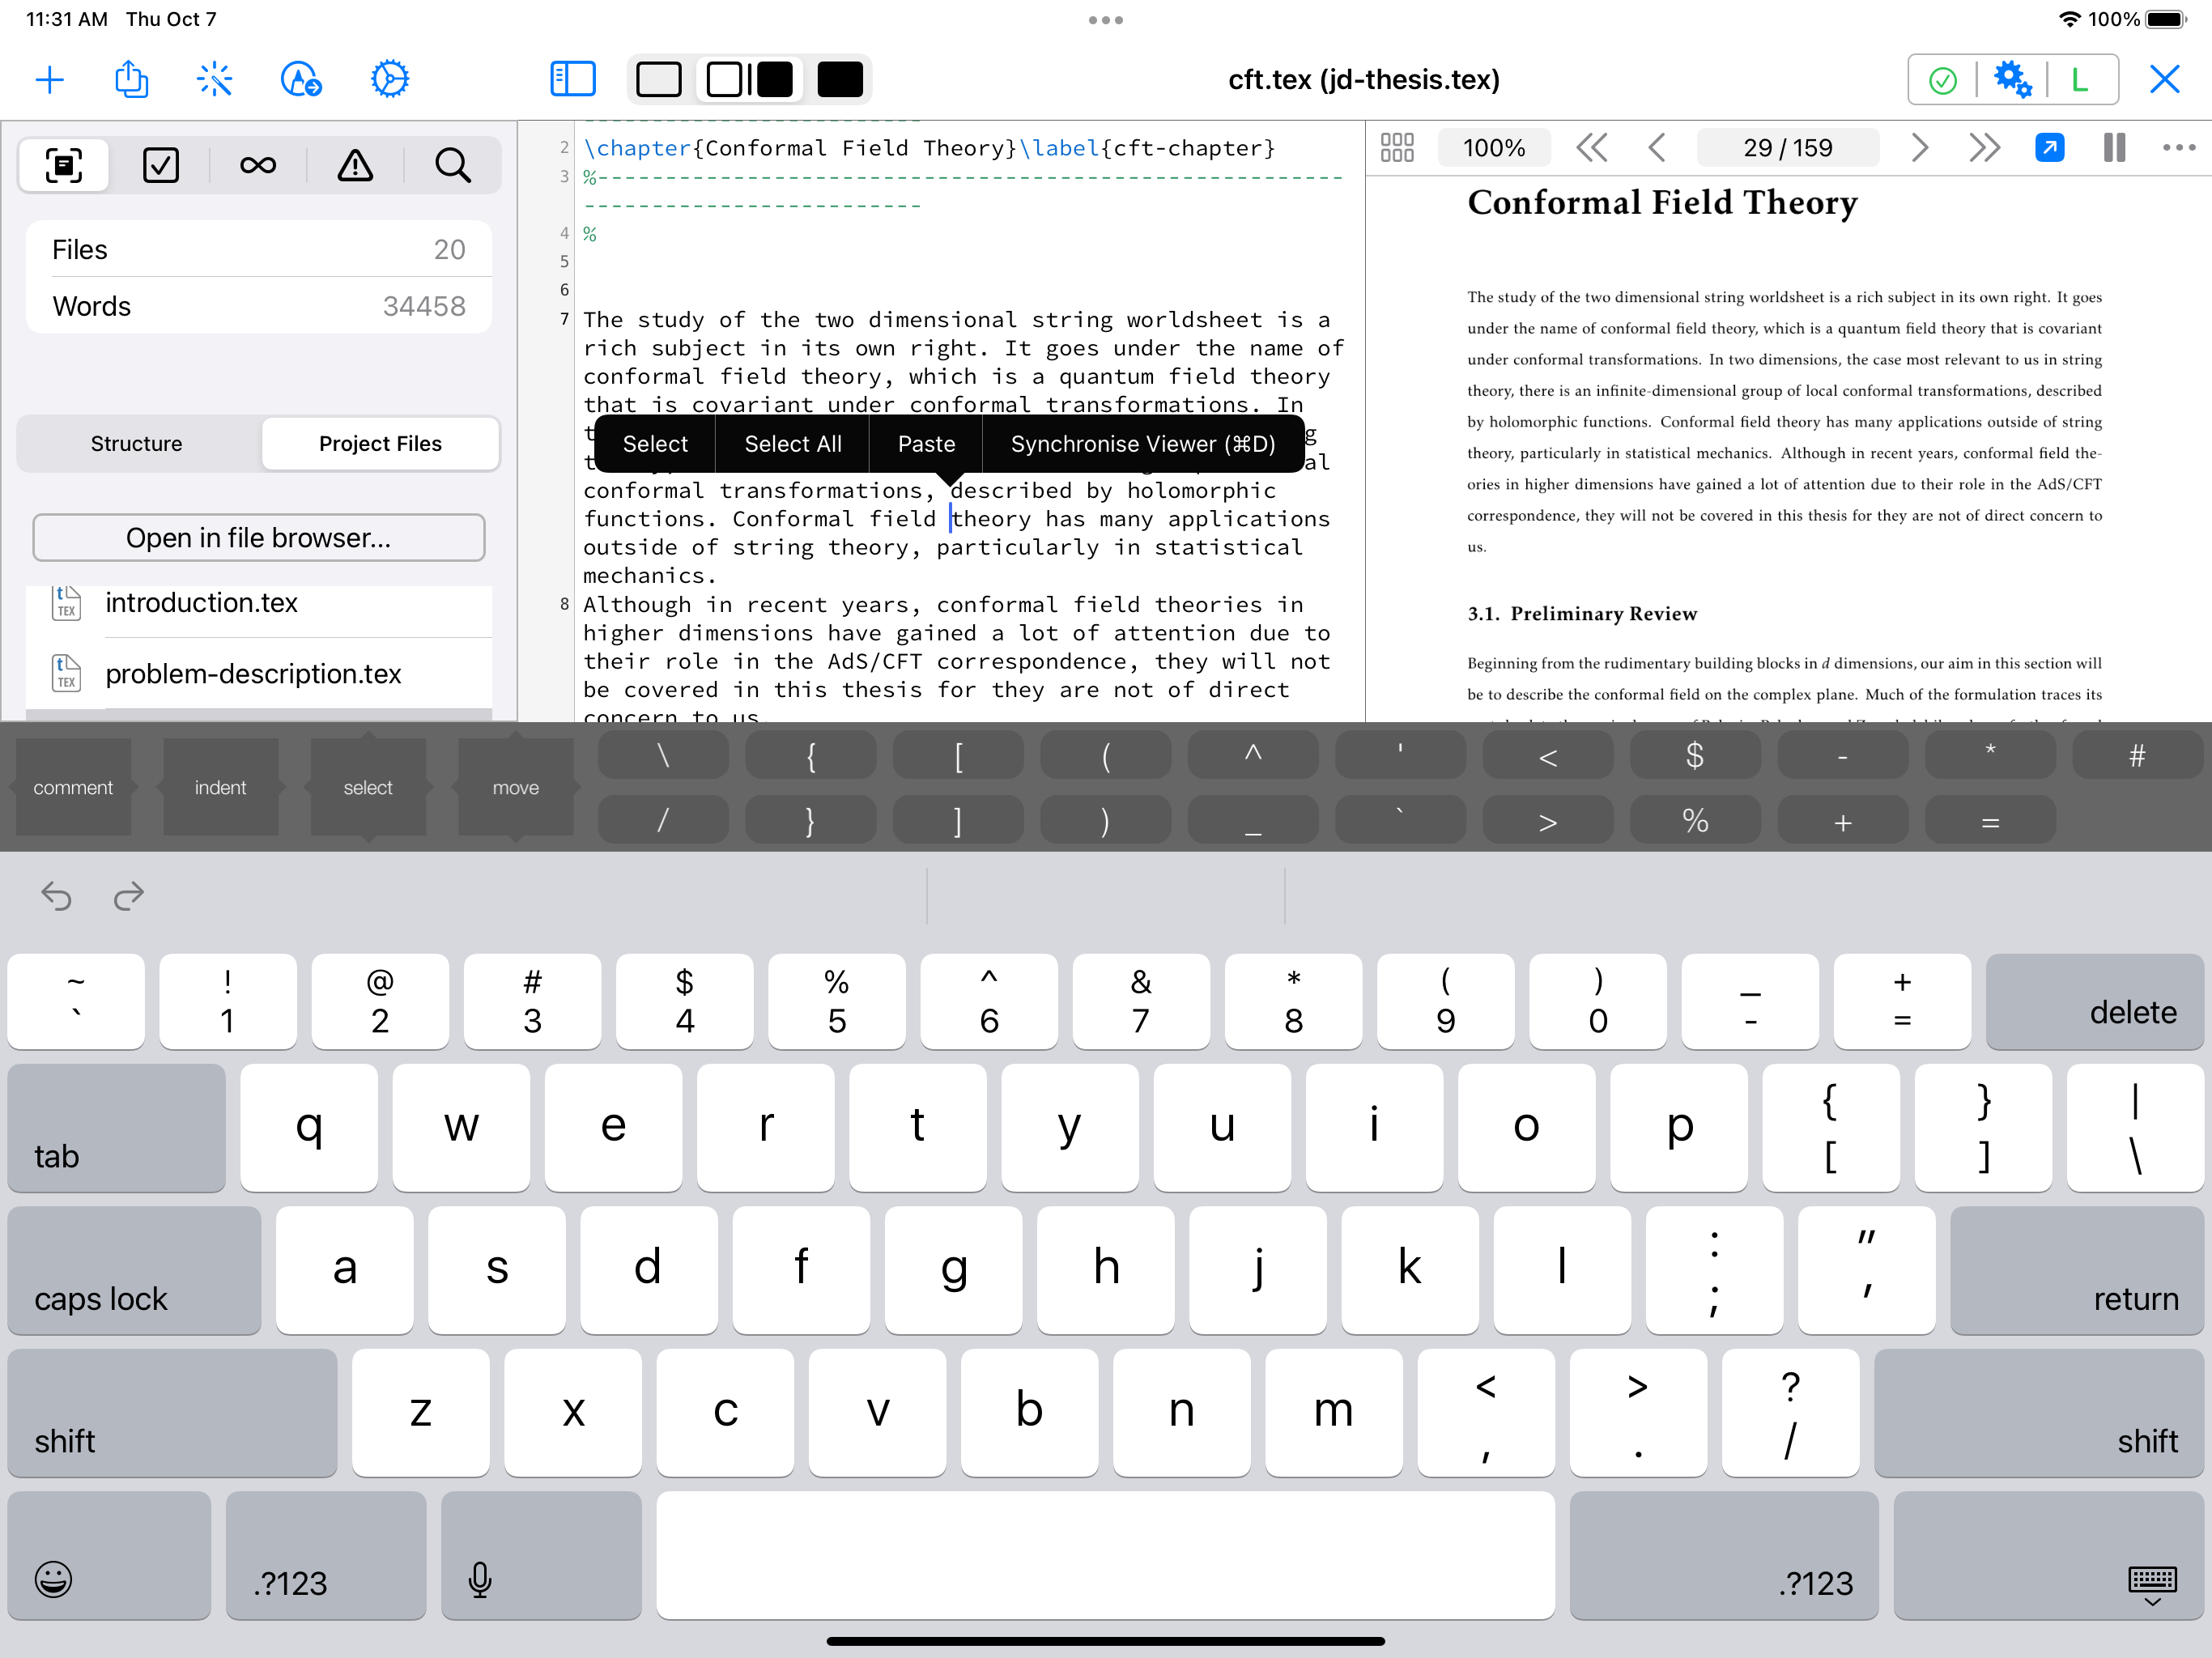 docs/apps/workspace/document-viewer/syncing-with-editor/one-off-syncing-editor-to-pdf_ios.png